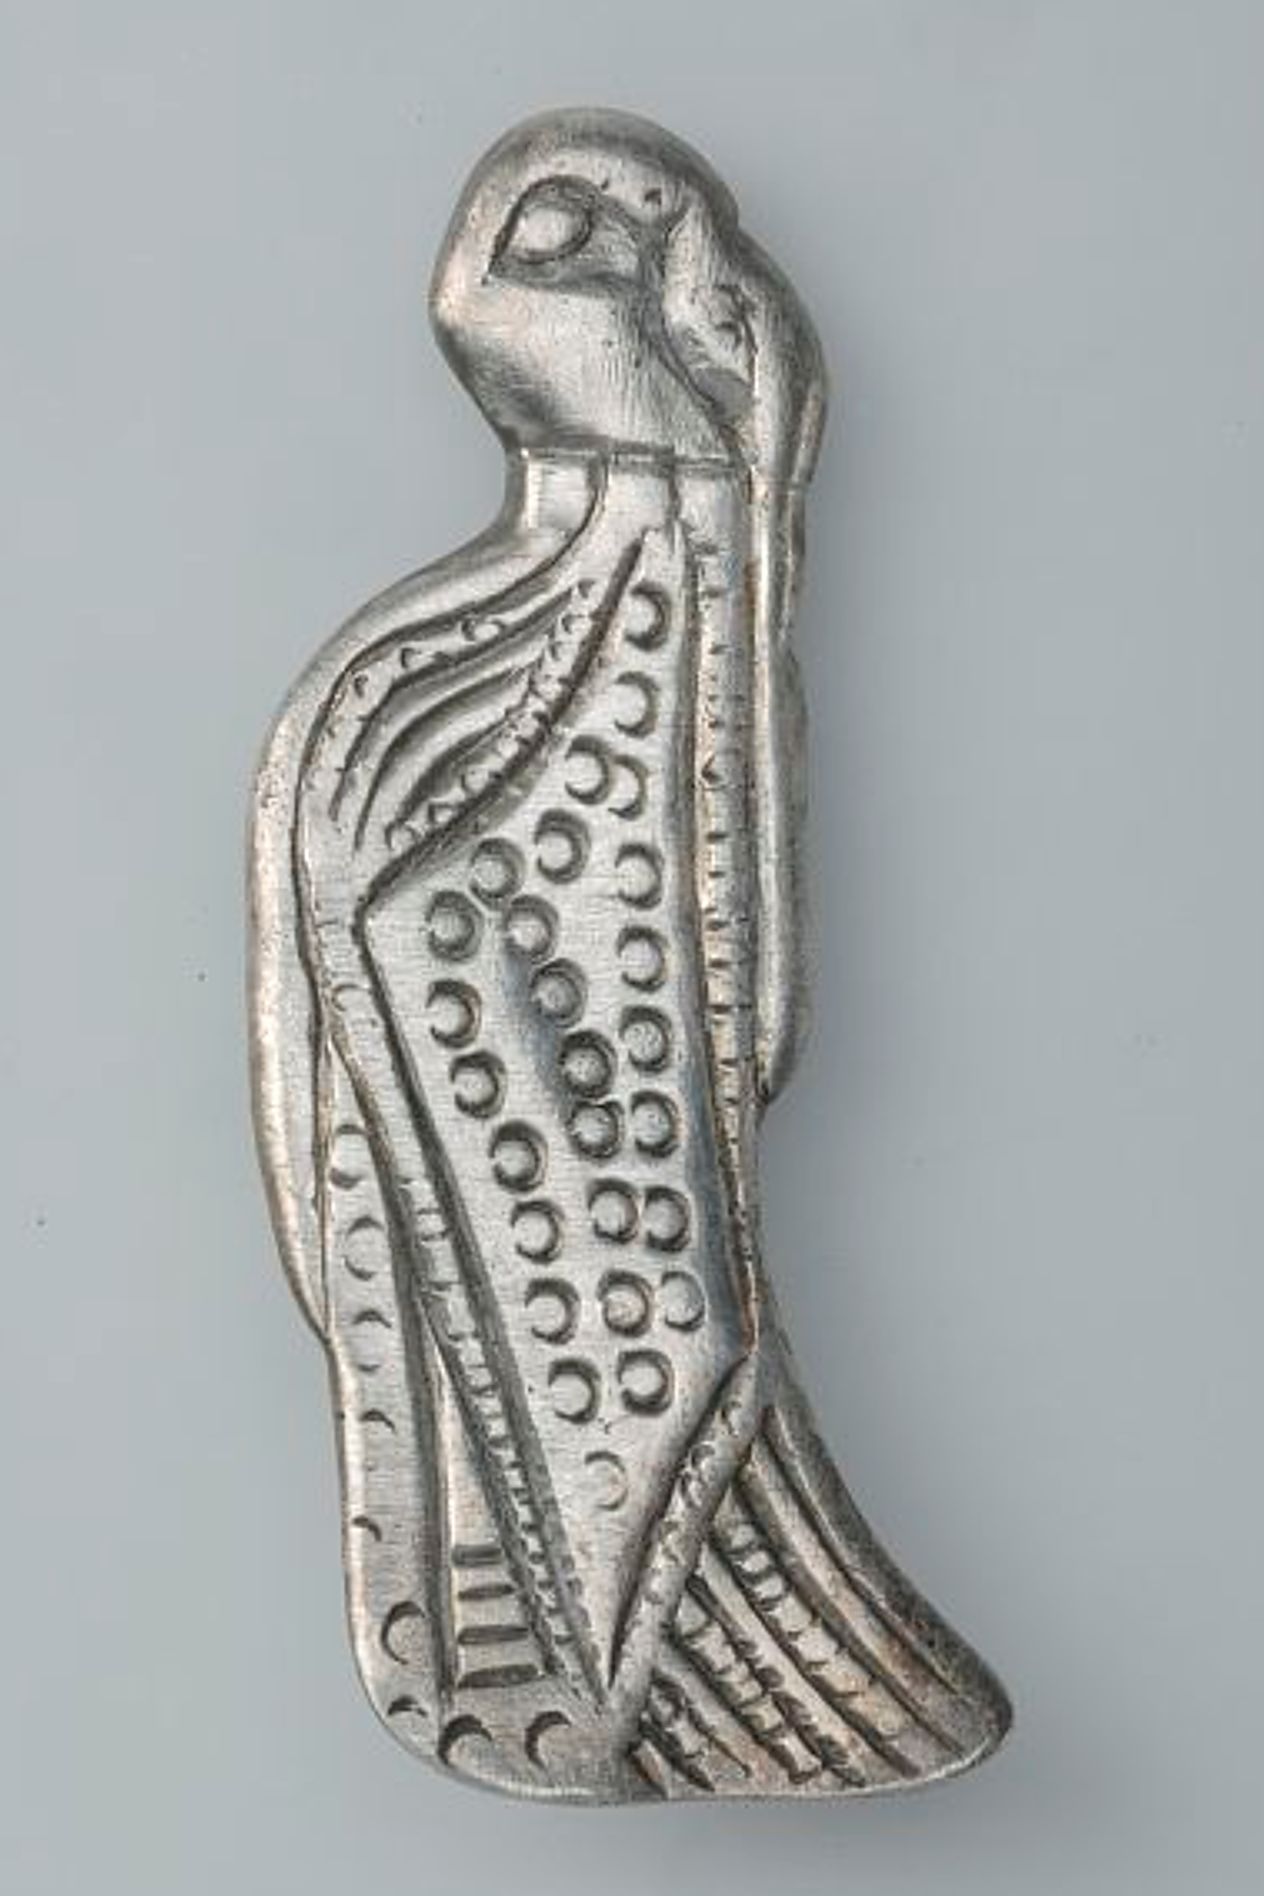 A figure of a valkyrie, carved from silver.